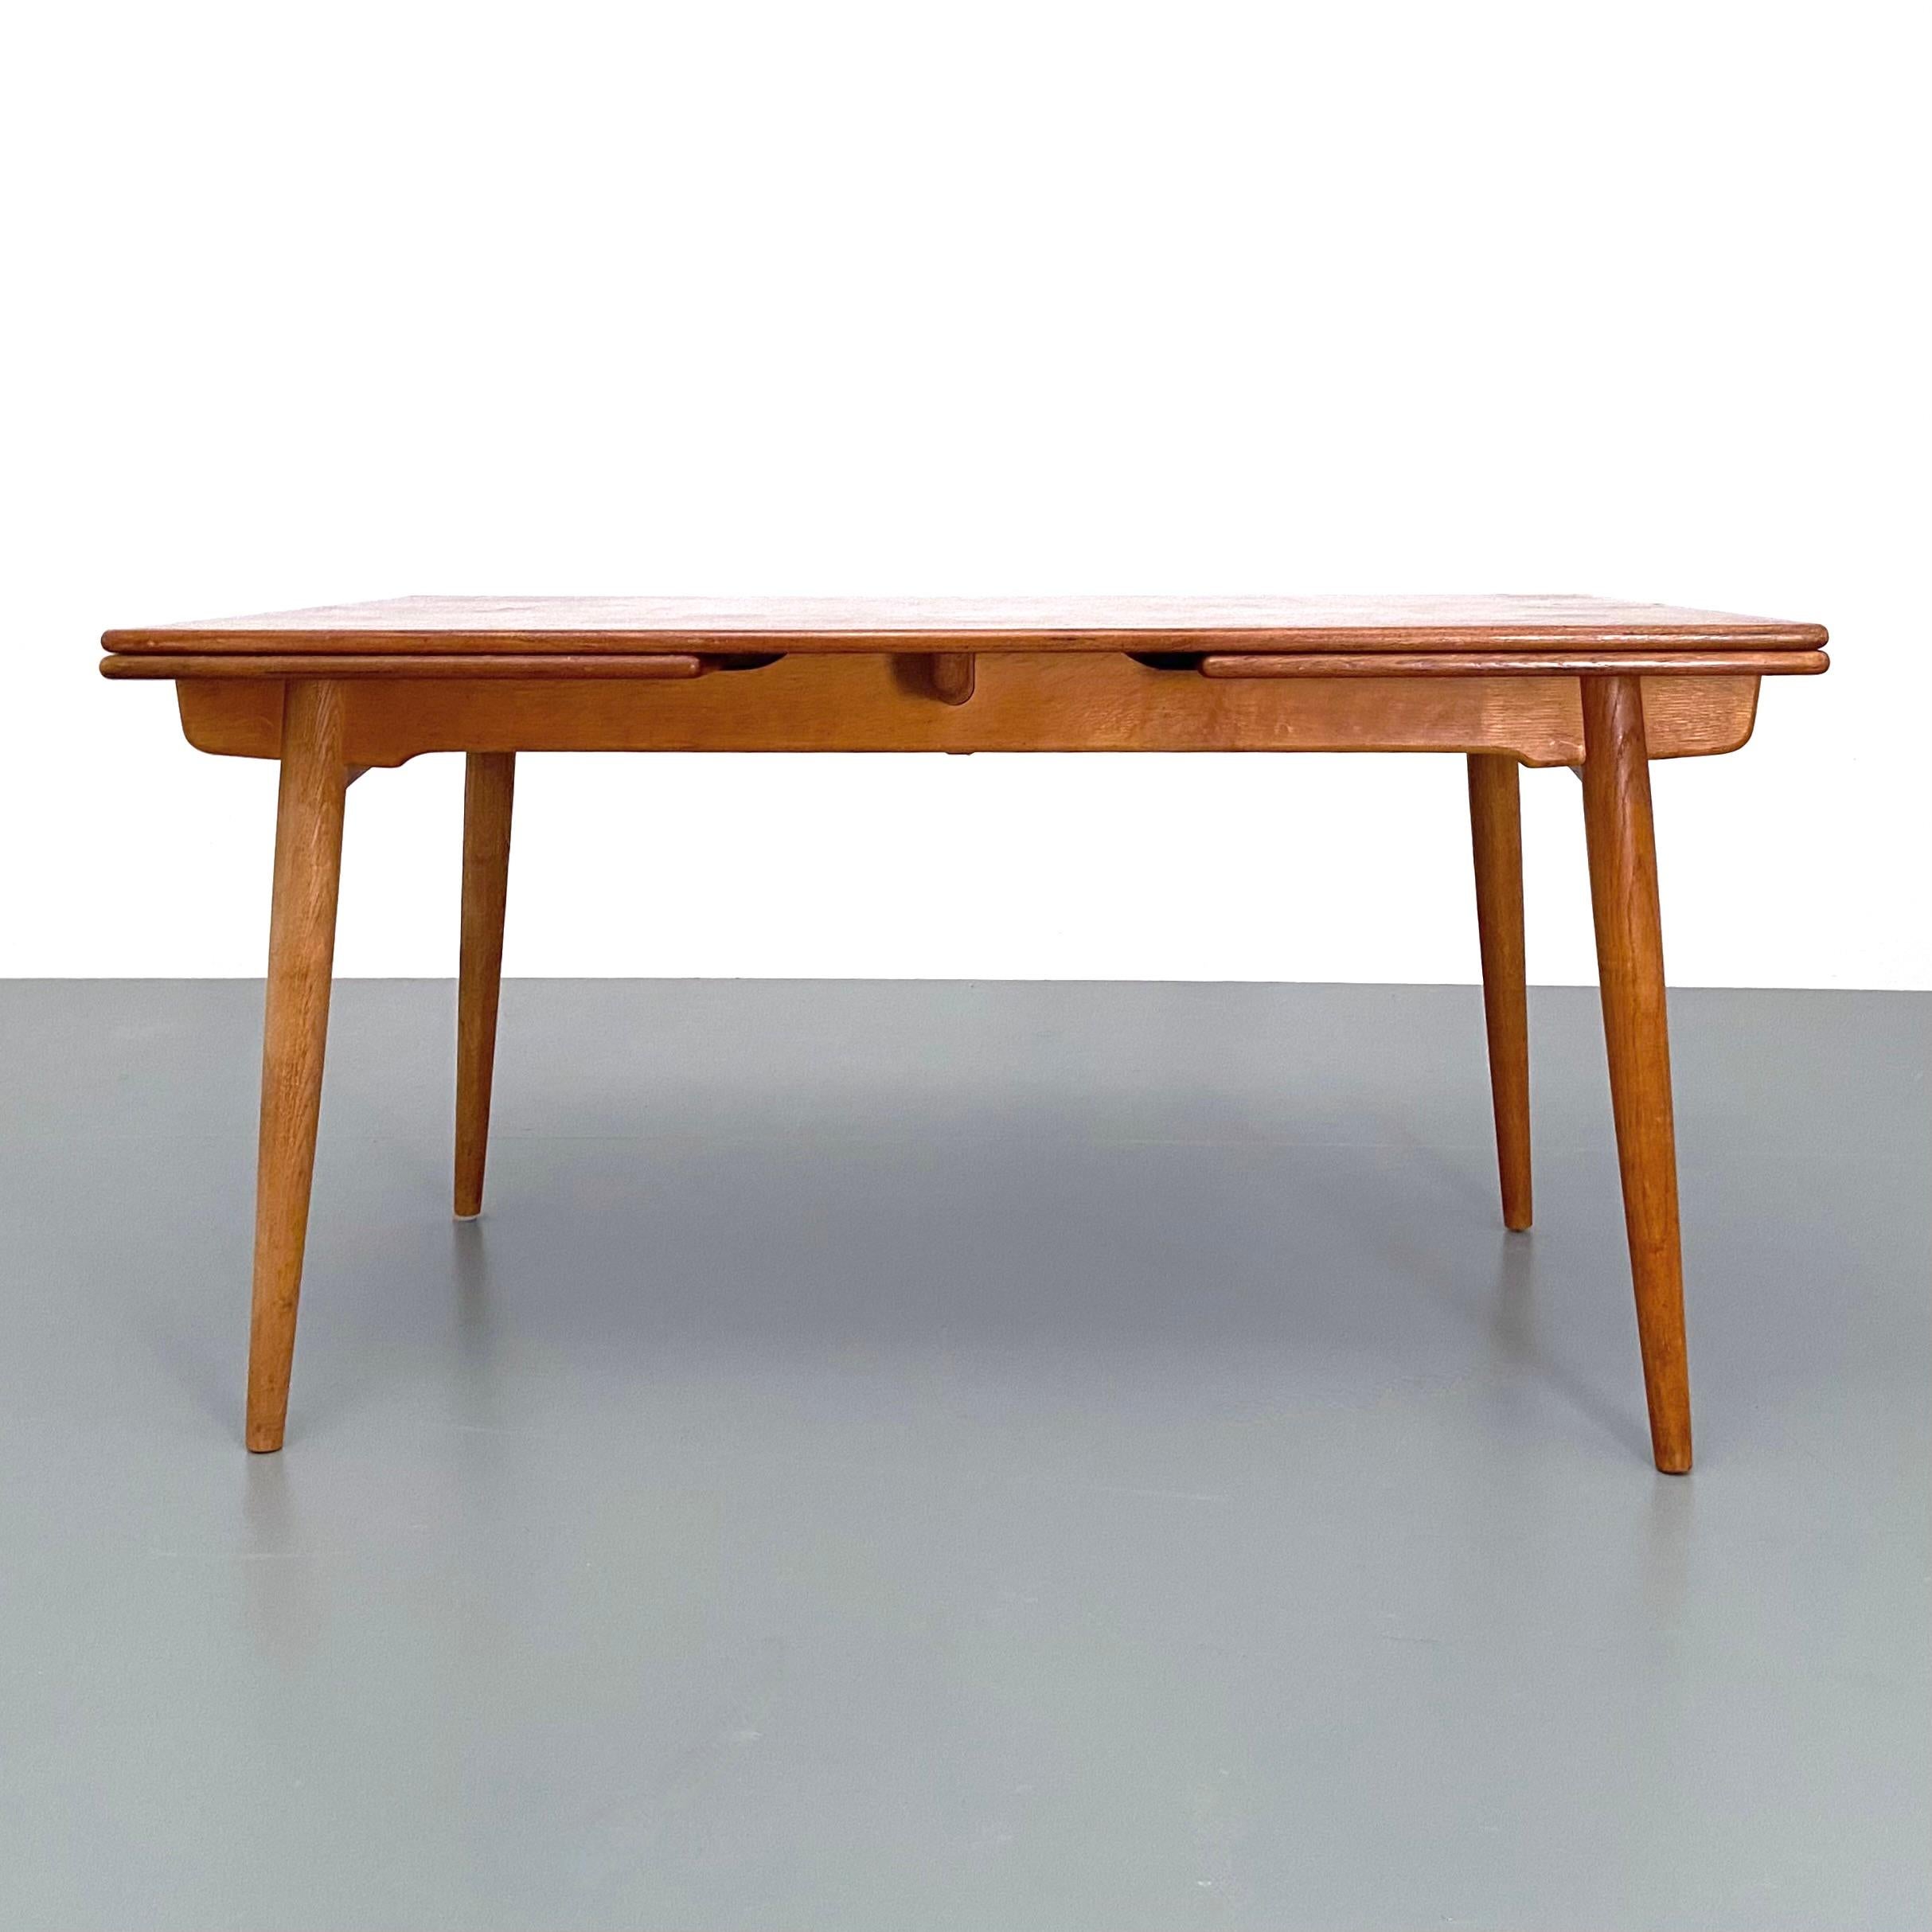 Dining table model AT-312 designed by Hans Wegner for Andreas Tuck, Denmark, 1960s.
Made in oak, the table boasts two pull-out leaves which hide under the top and integrate beautifully with it when the table is not extended; this is not only a